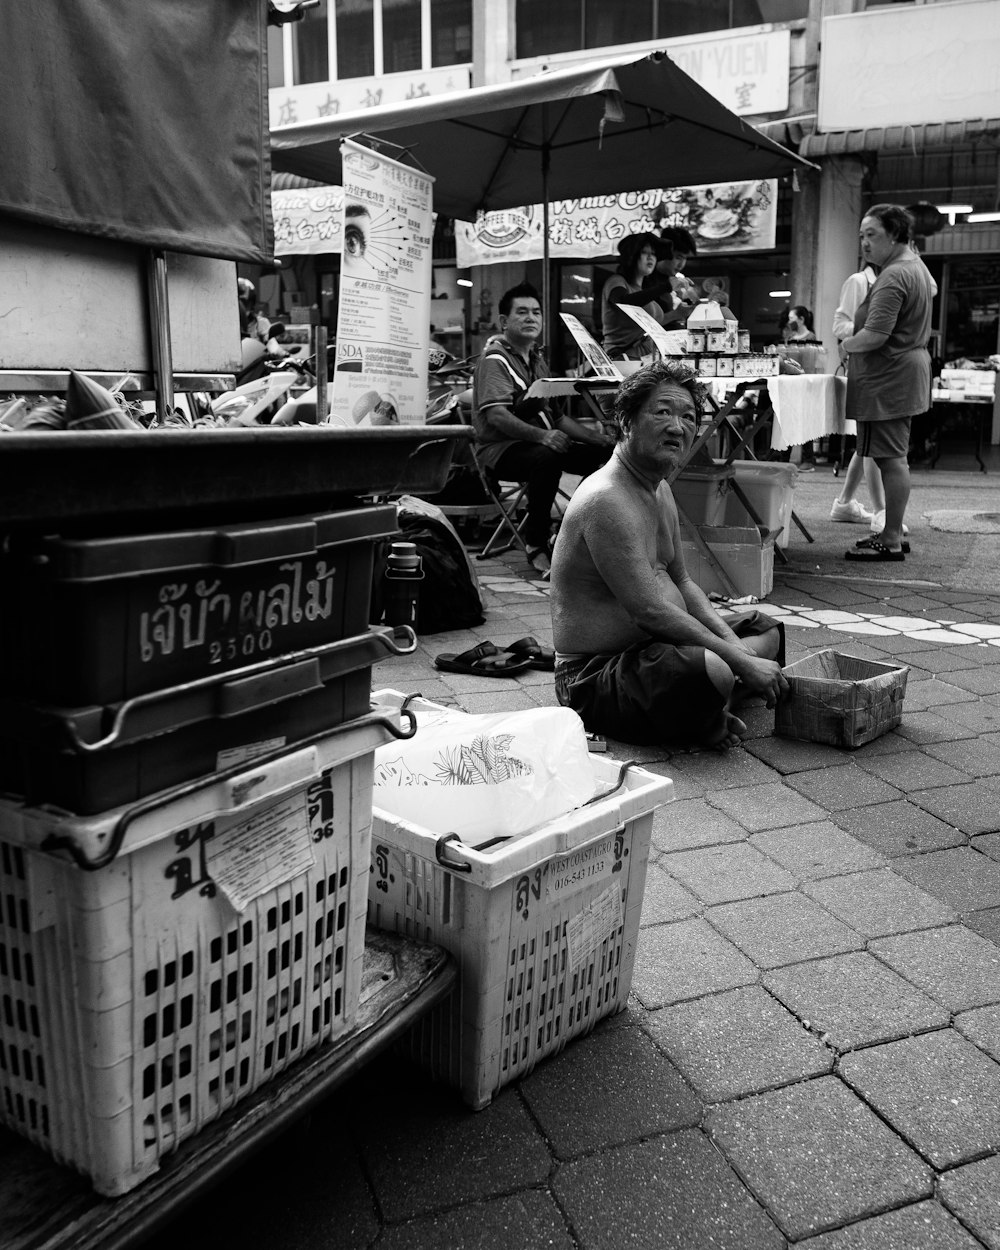 a man sitting on the ground in front of a market